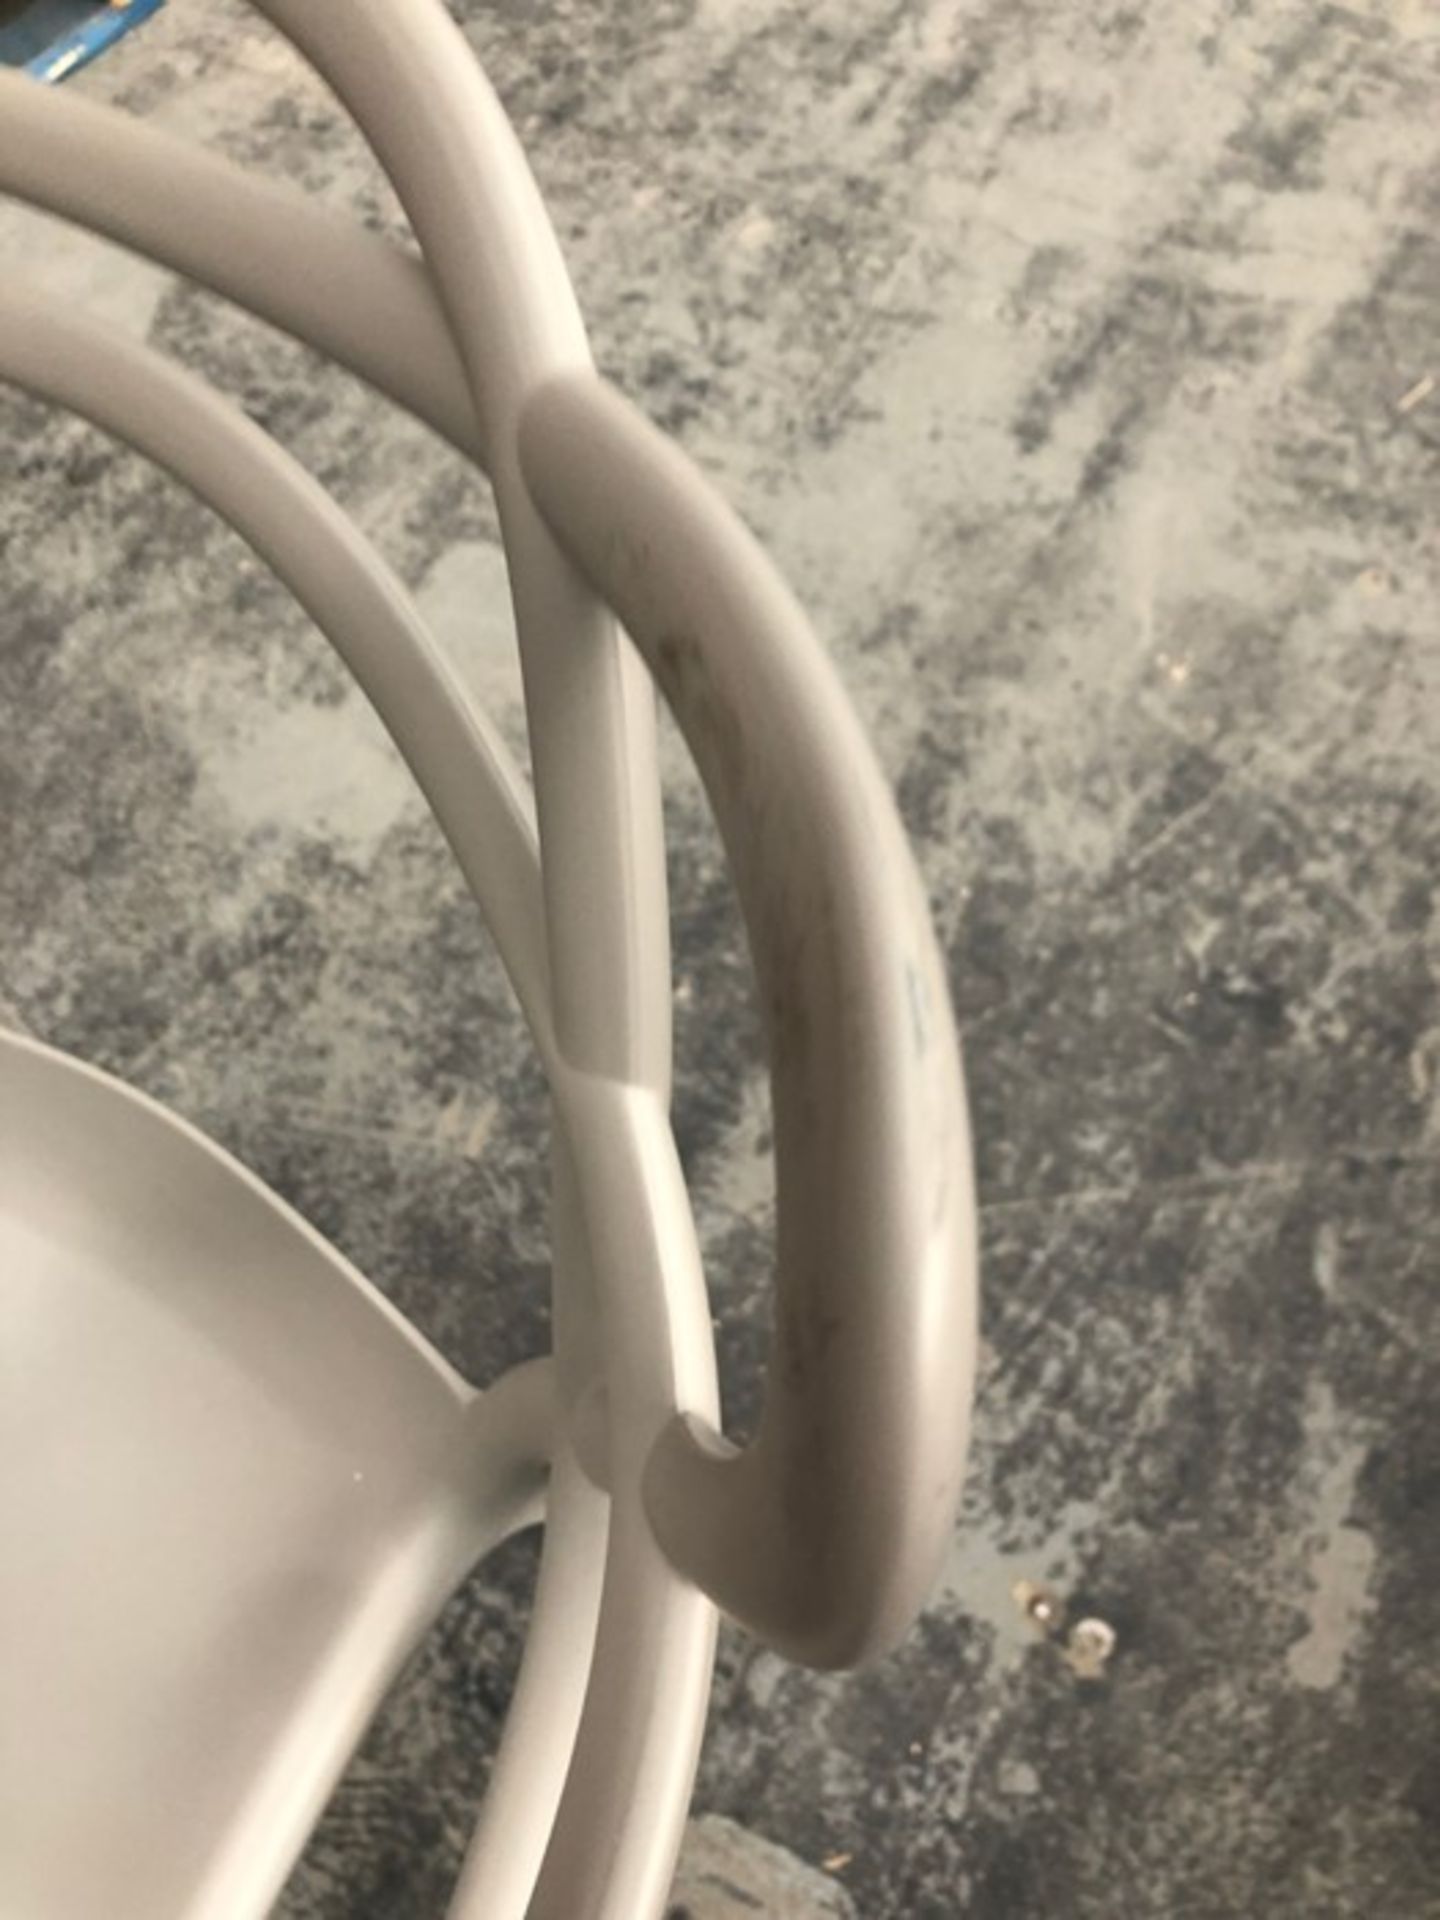 PHILIPPE STARCK FOR KARTELL MASTERS CHAIR - GREY - Image 2 of 3